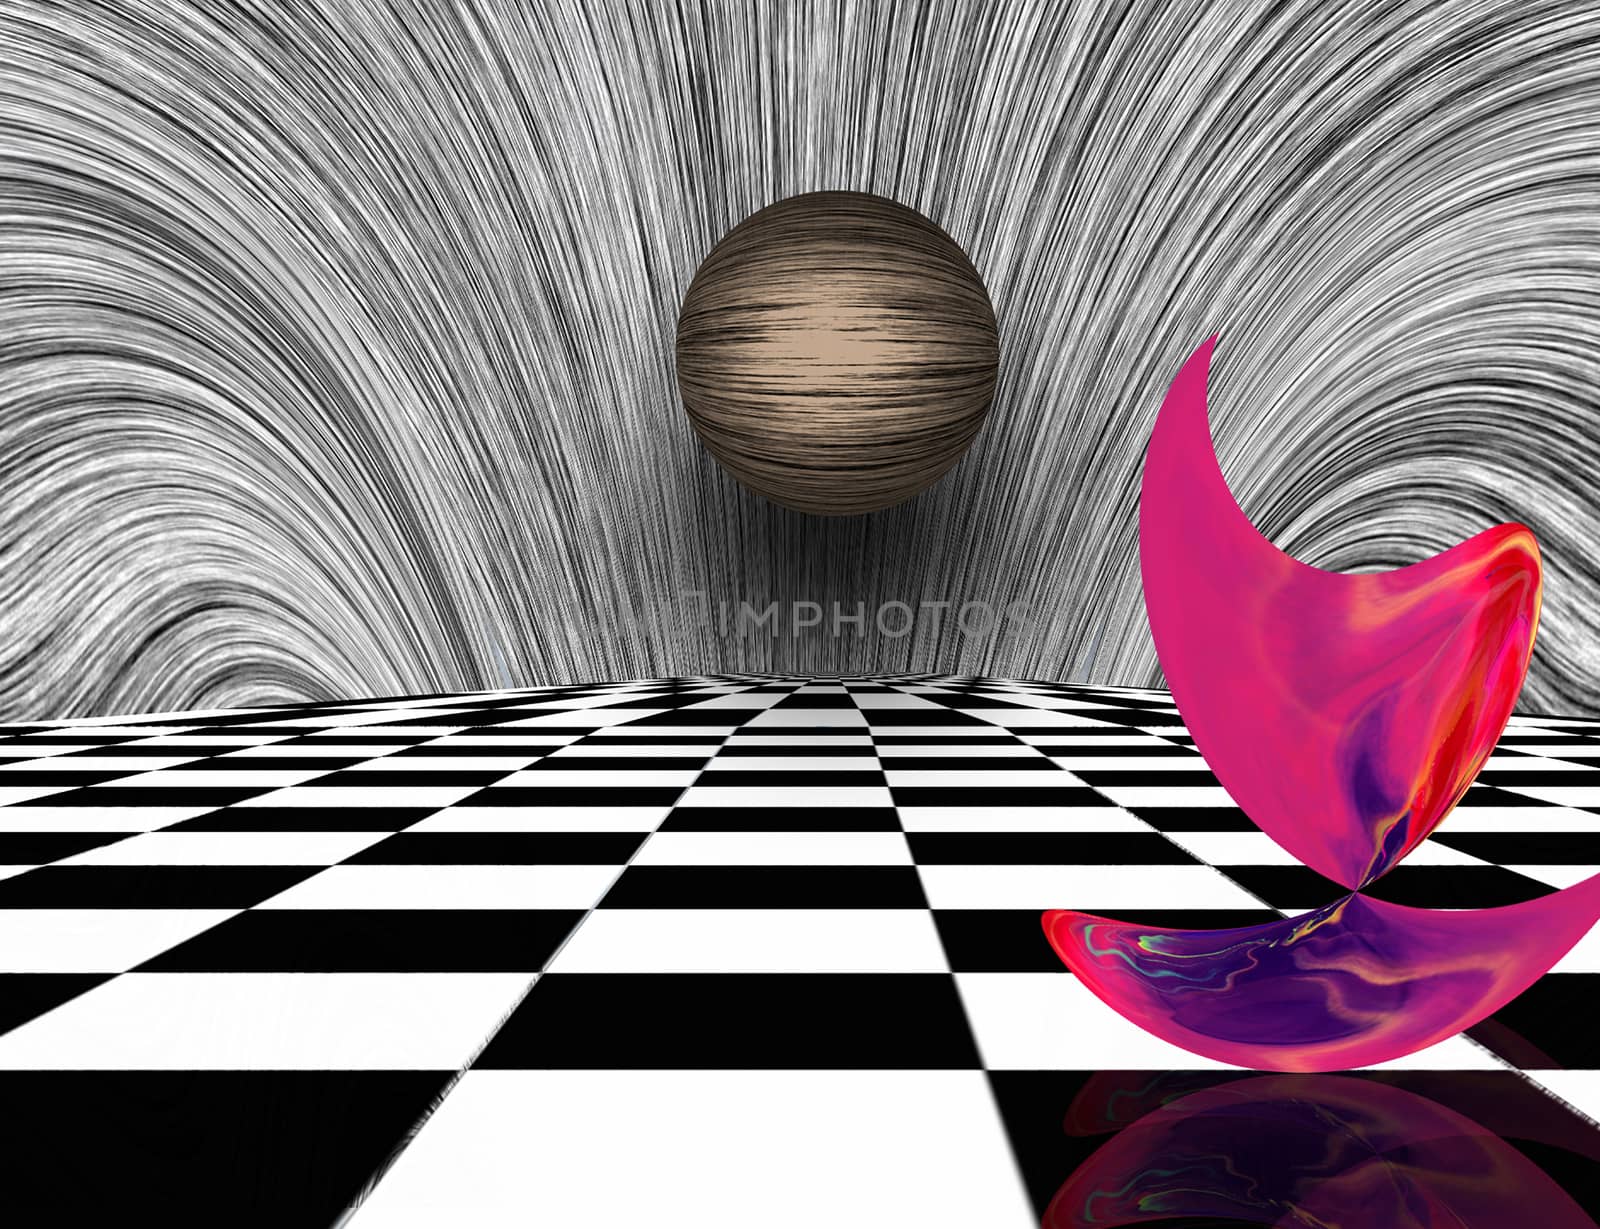 Surreal composition. Pink matter and sphere on chessboard